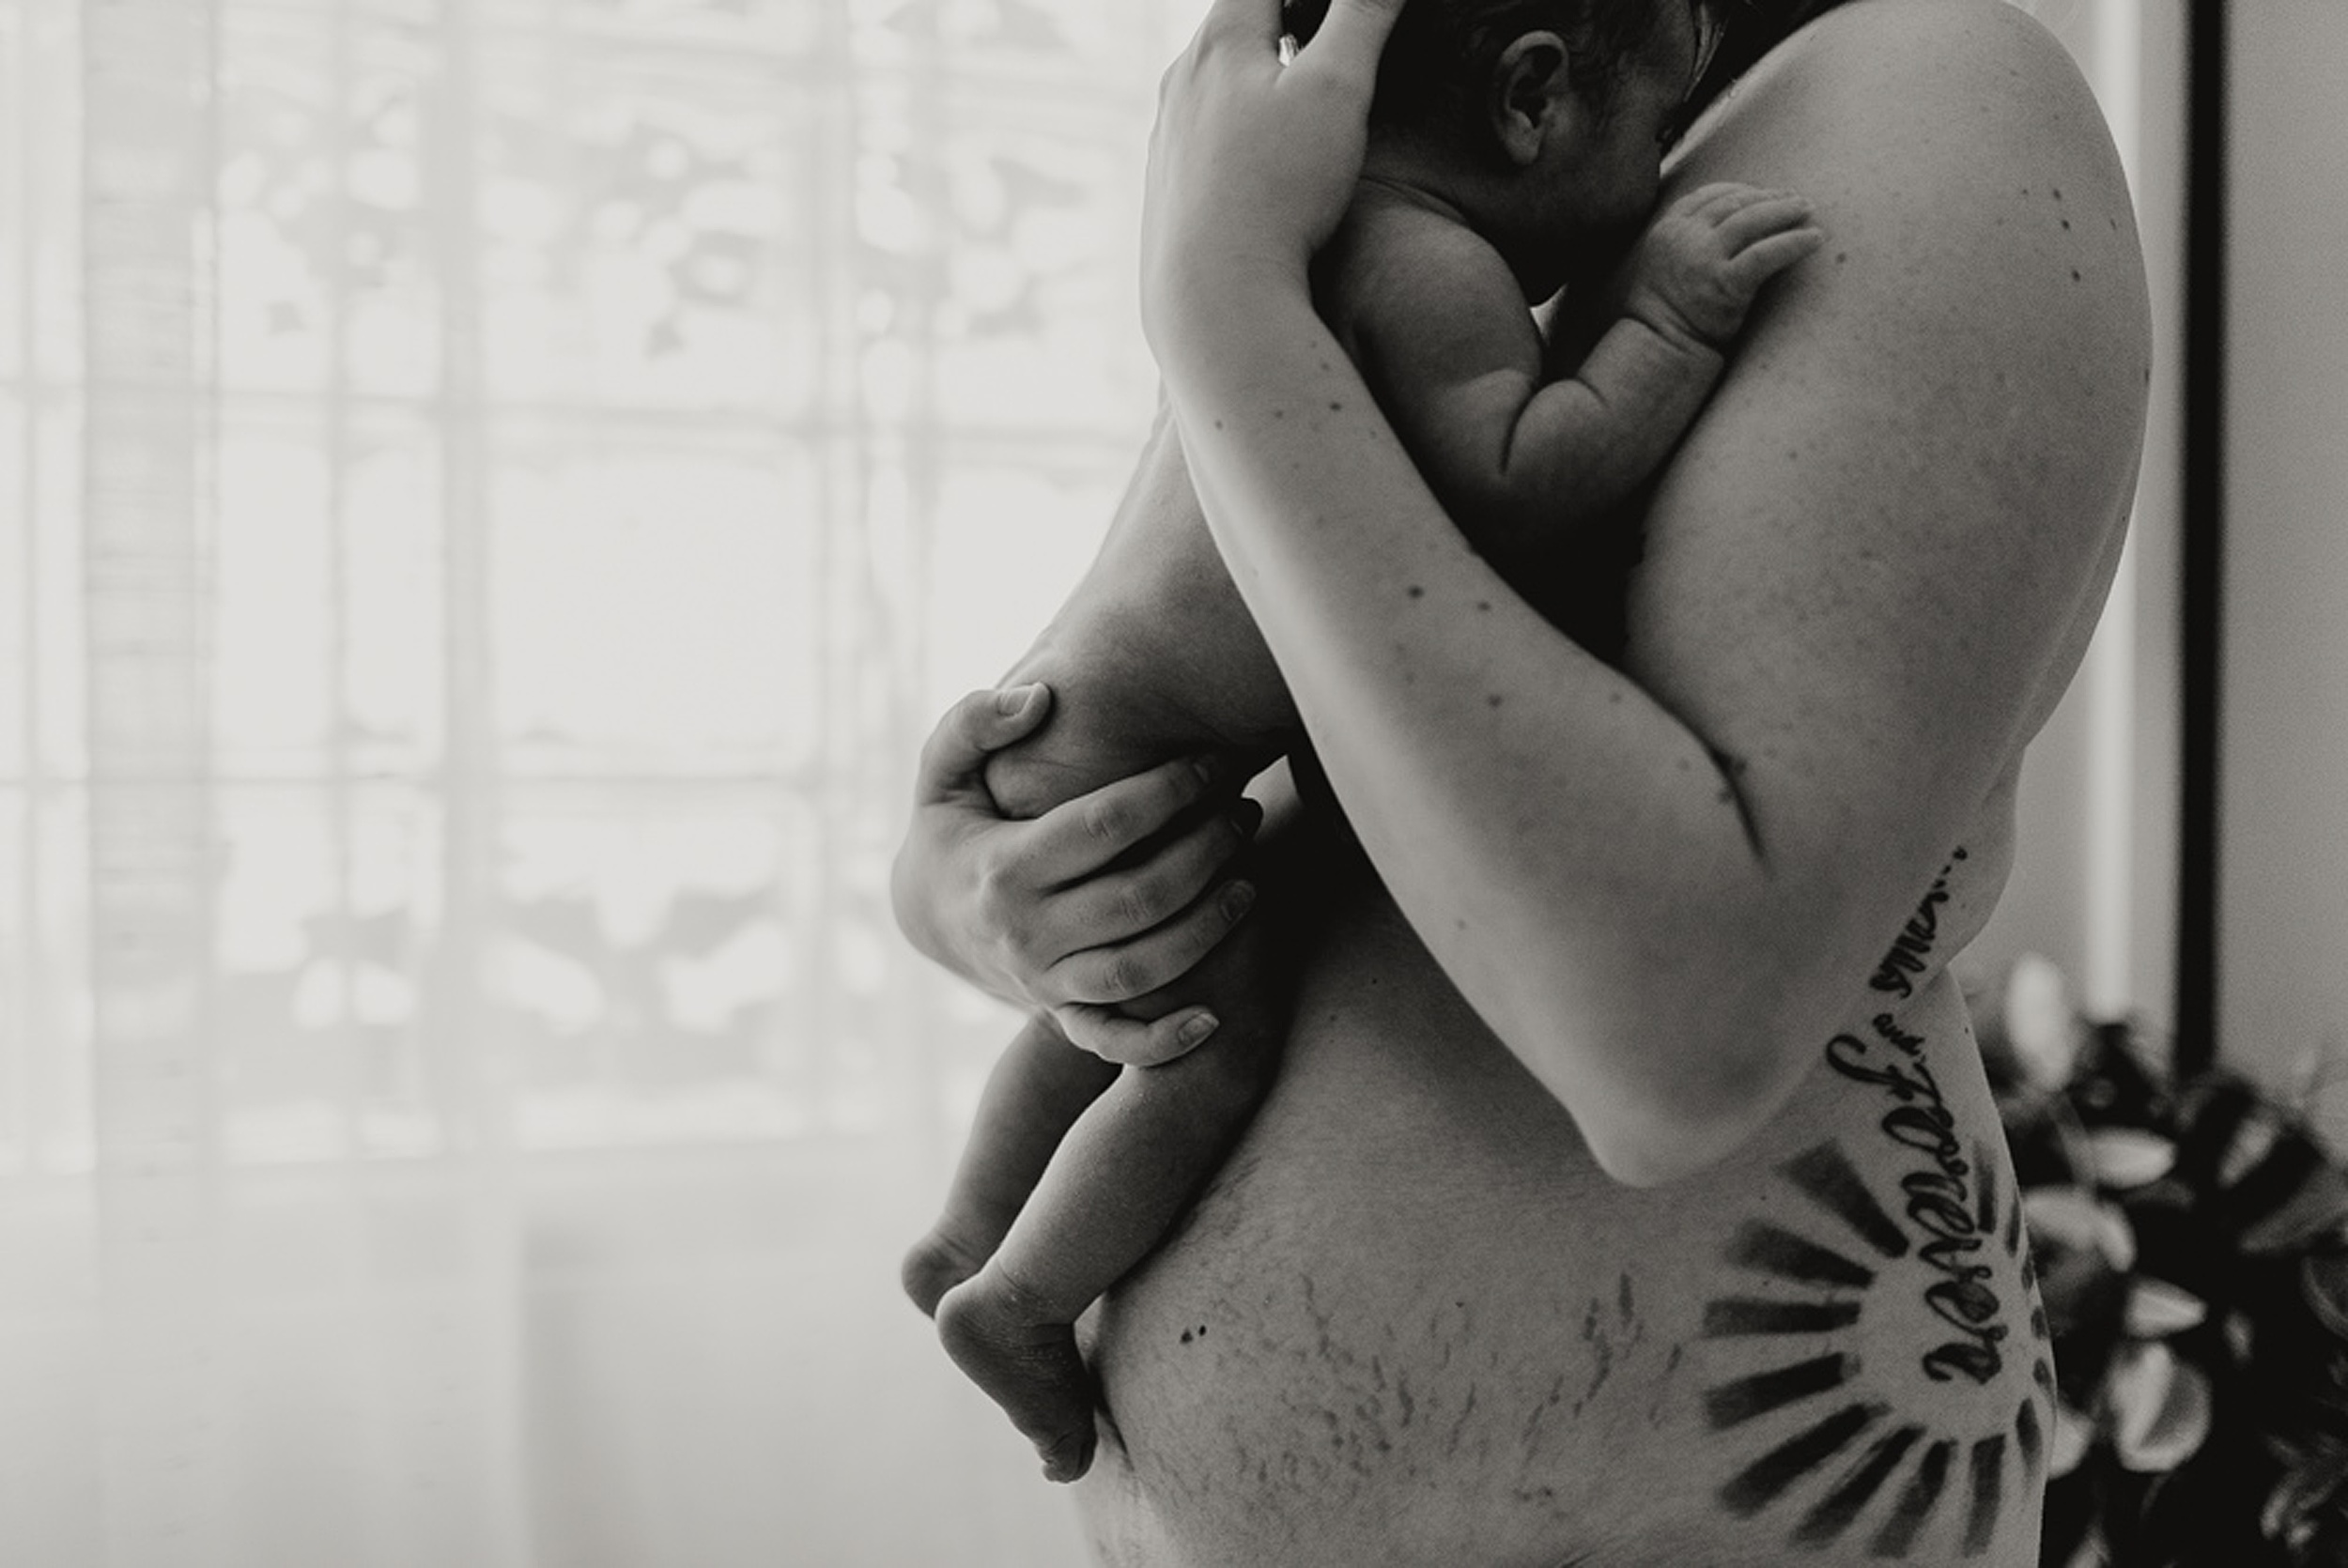 A mother stands in a bathroom cradling her newborn baby against her naked body after using family first midwifery